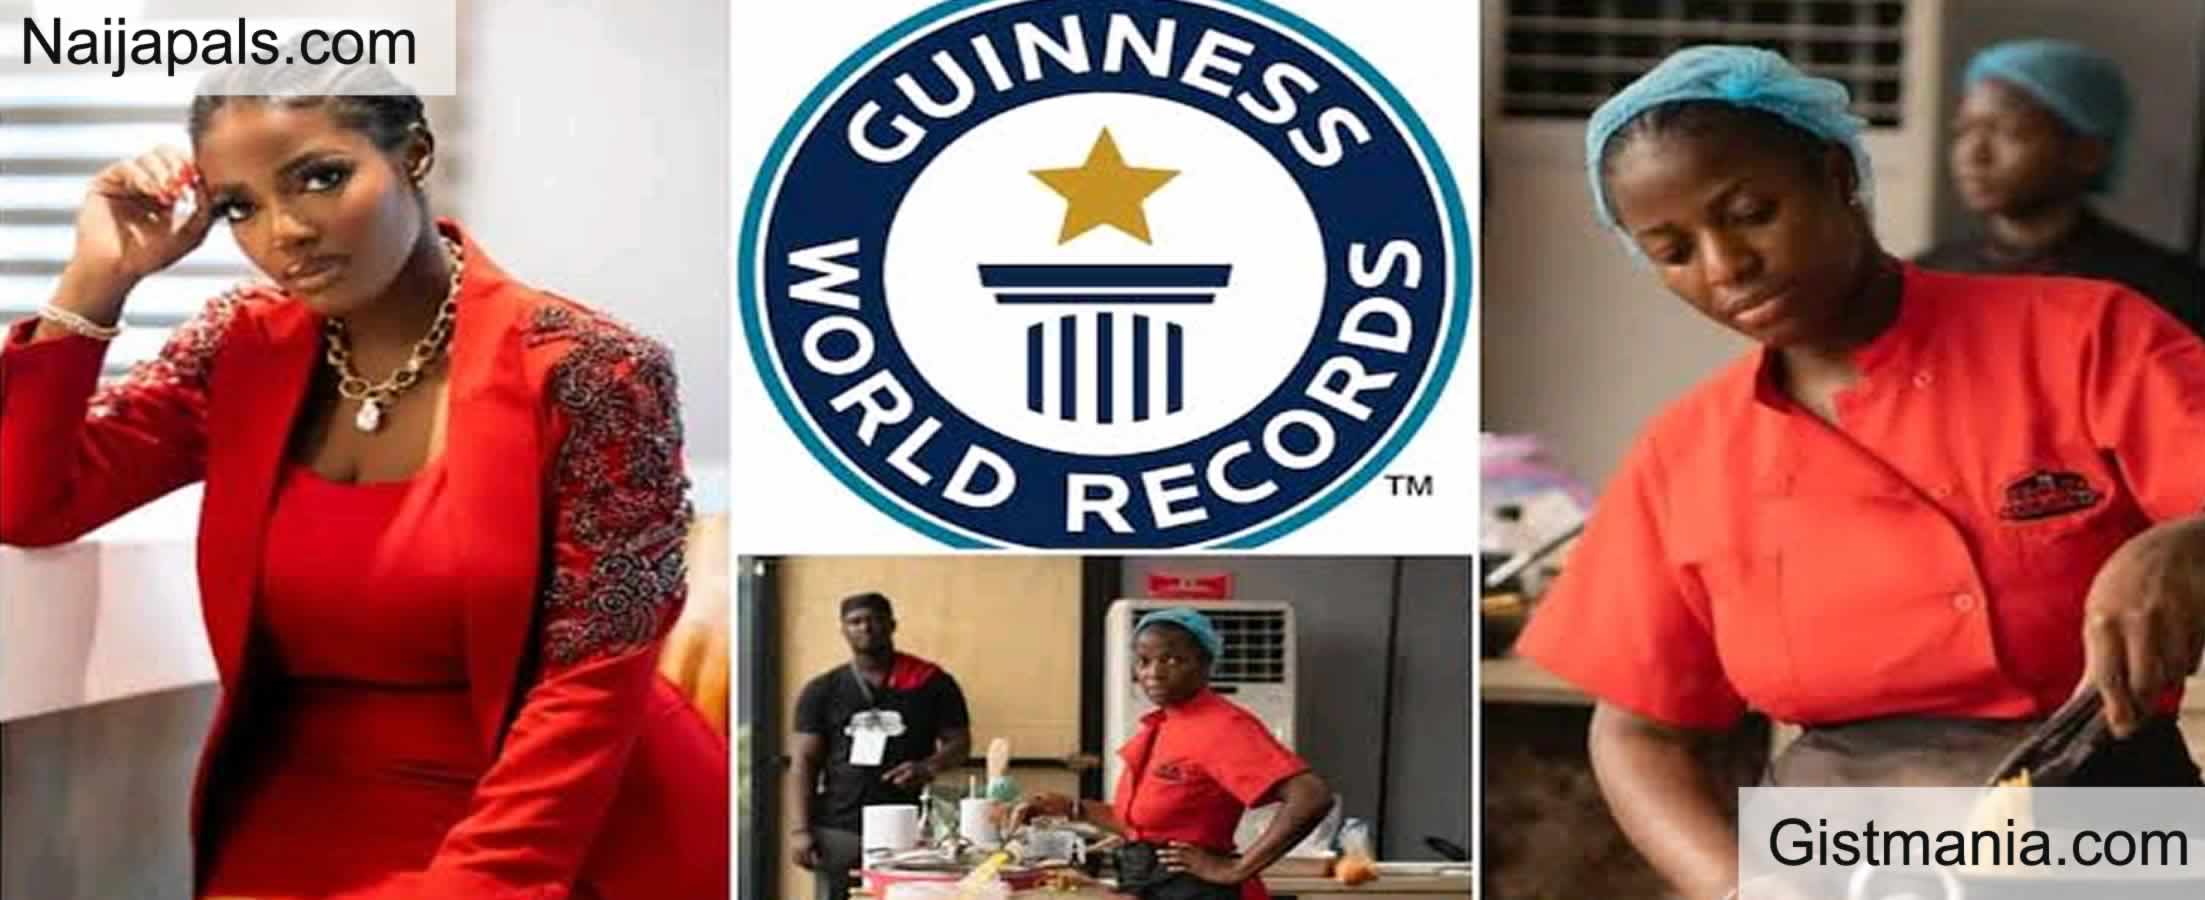 Attempt a record  Guinness World Records